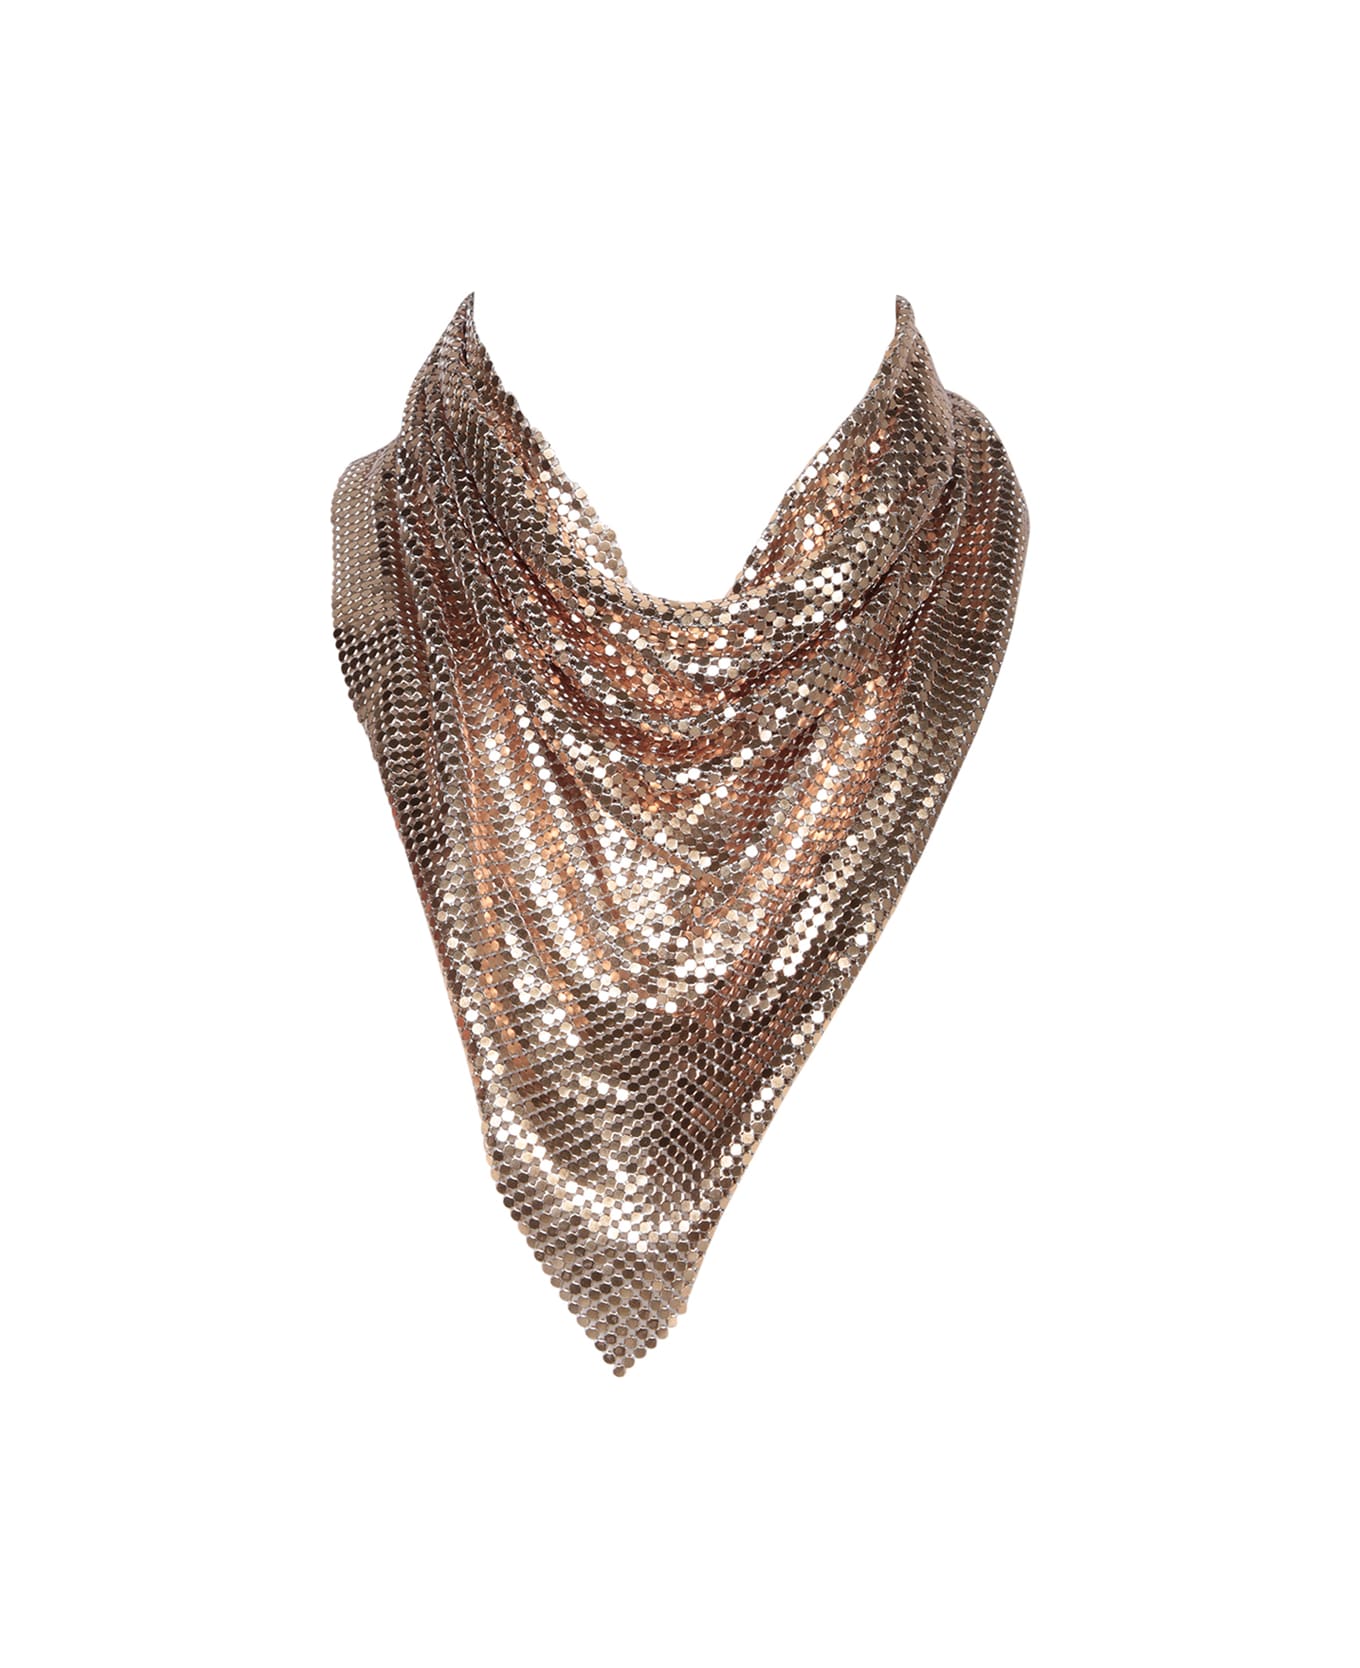 Paco Rabanne Gold Pixel Scarf Necklace - Gold